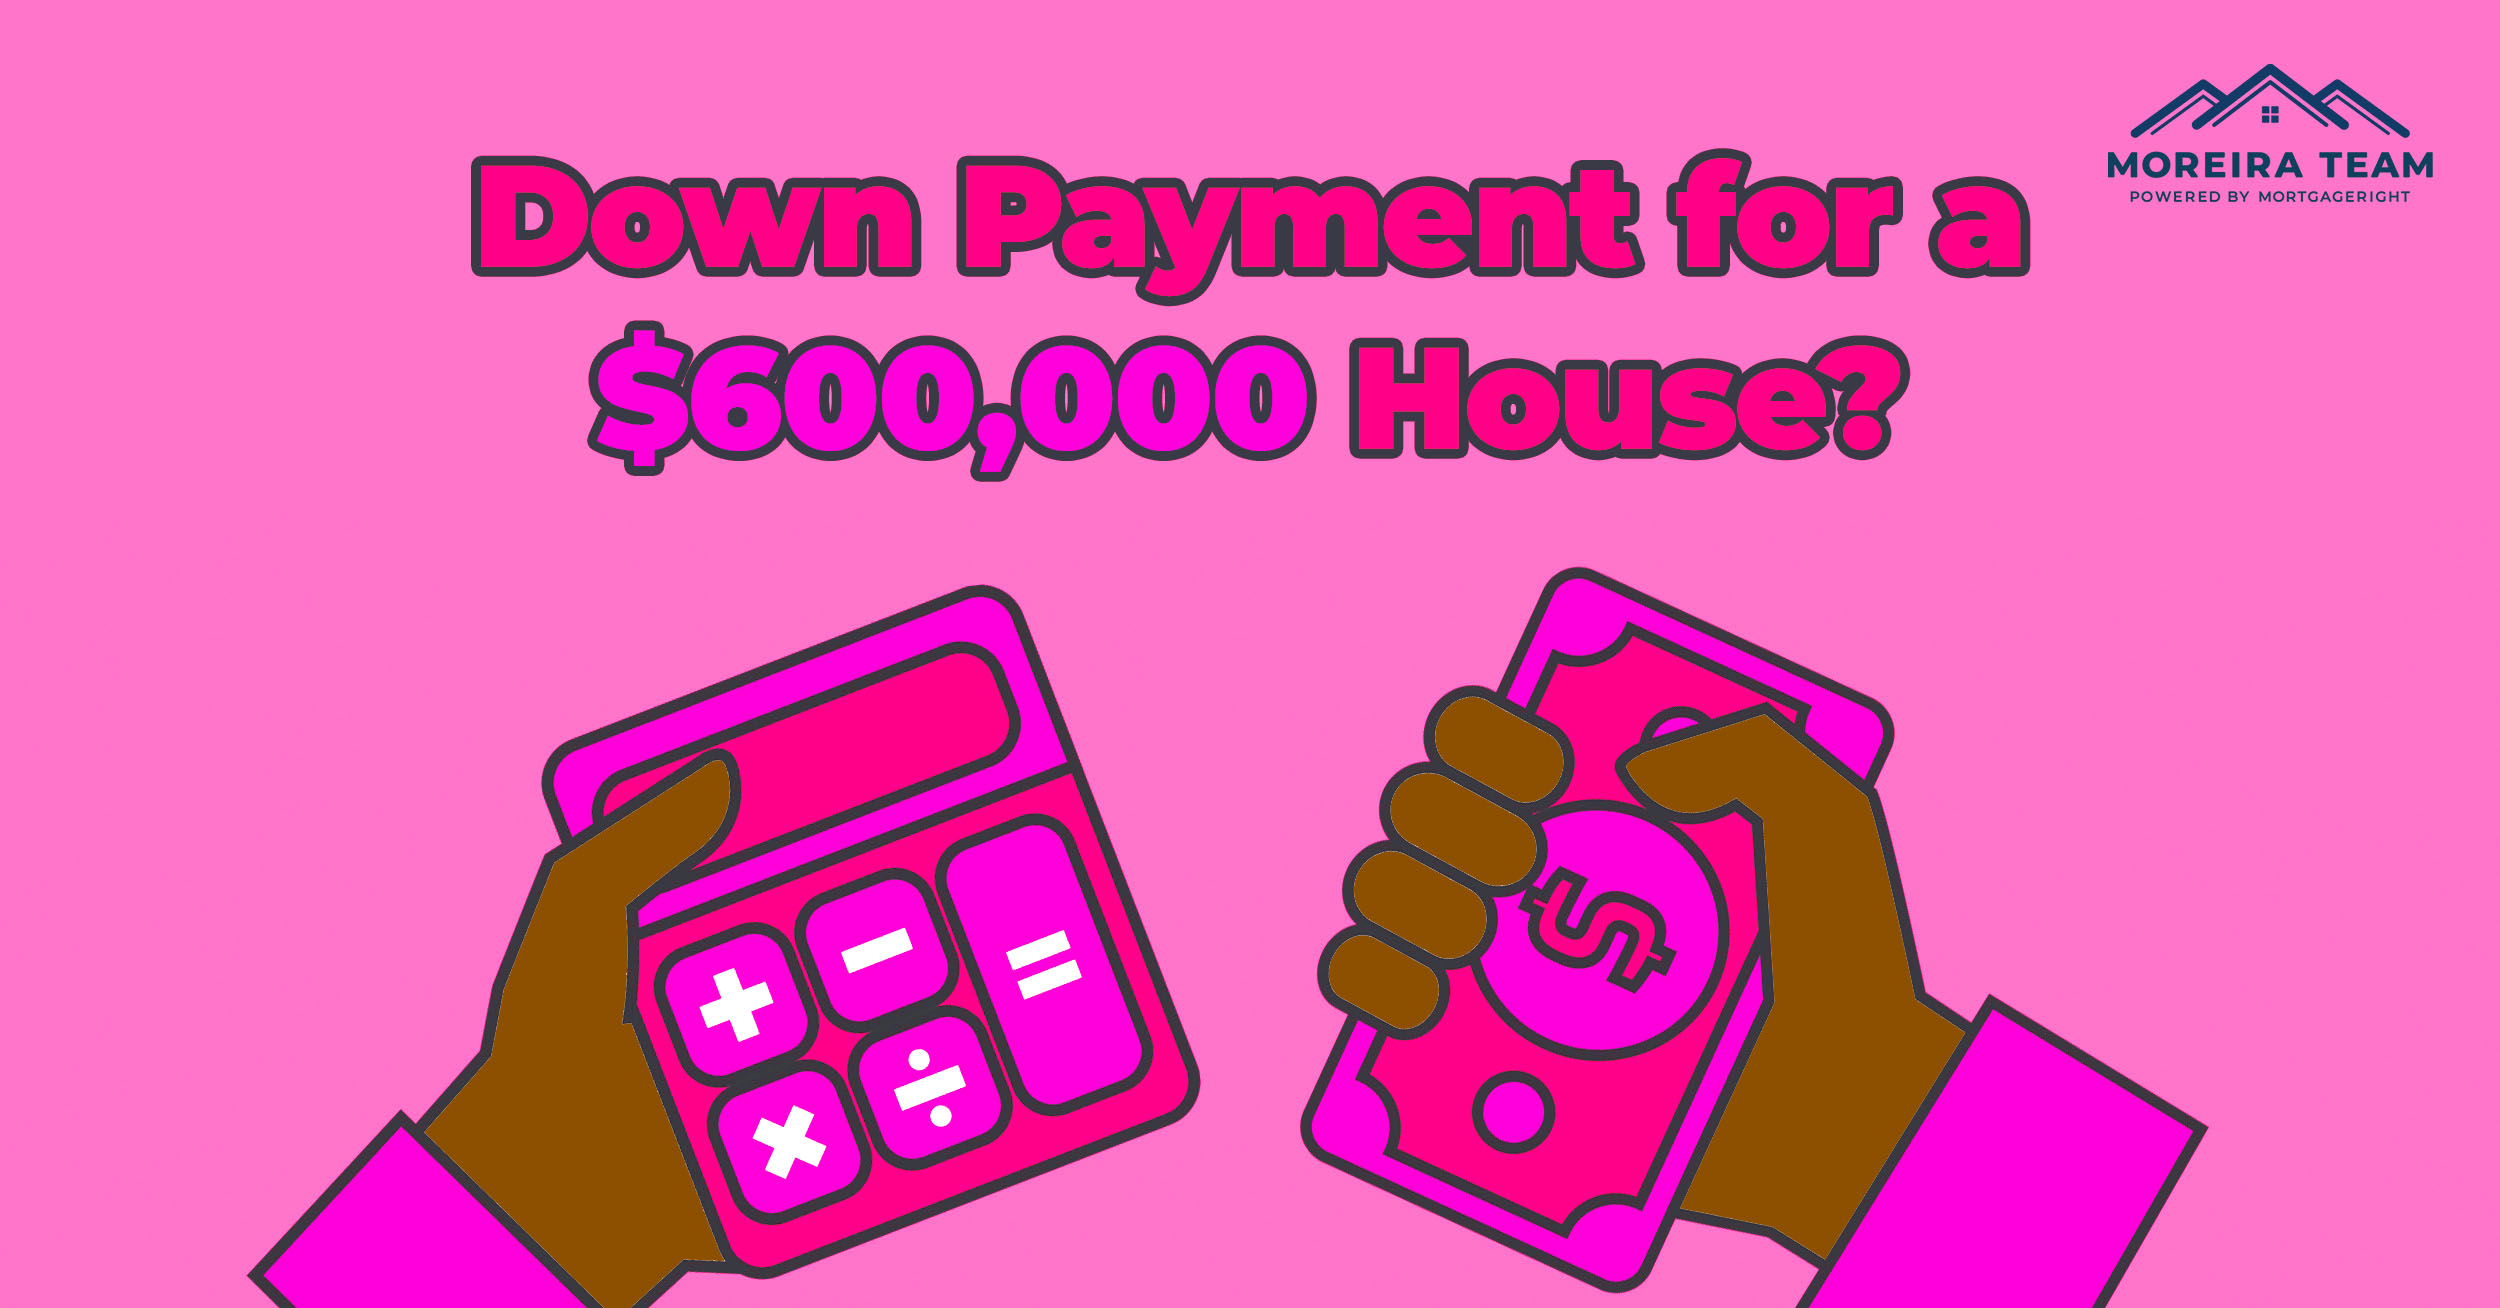 Down payment amount on a $600,000 house